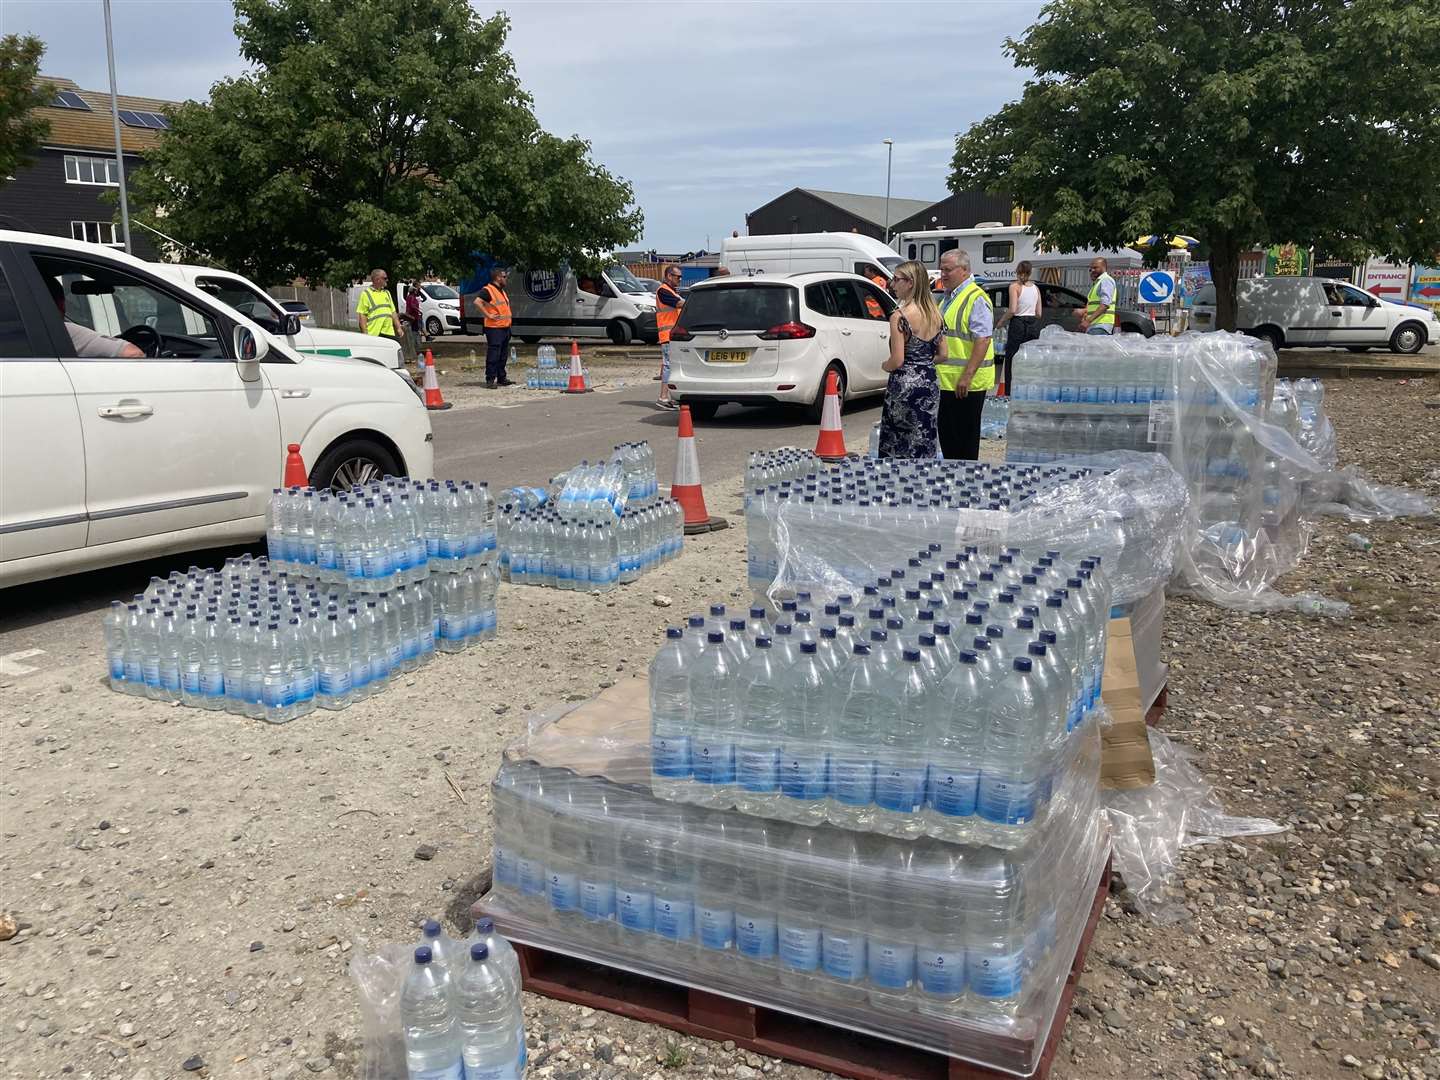 Hundreds of people arriving at the Leysdown emergency water collection point as Southern Water provide 350,000 litres of bottled supplies to customers